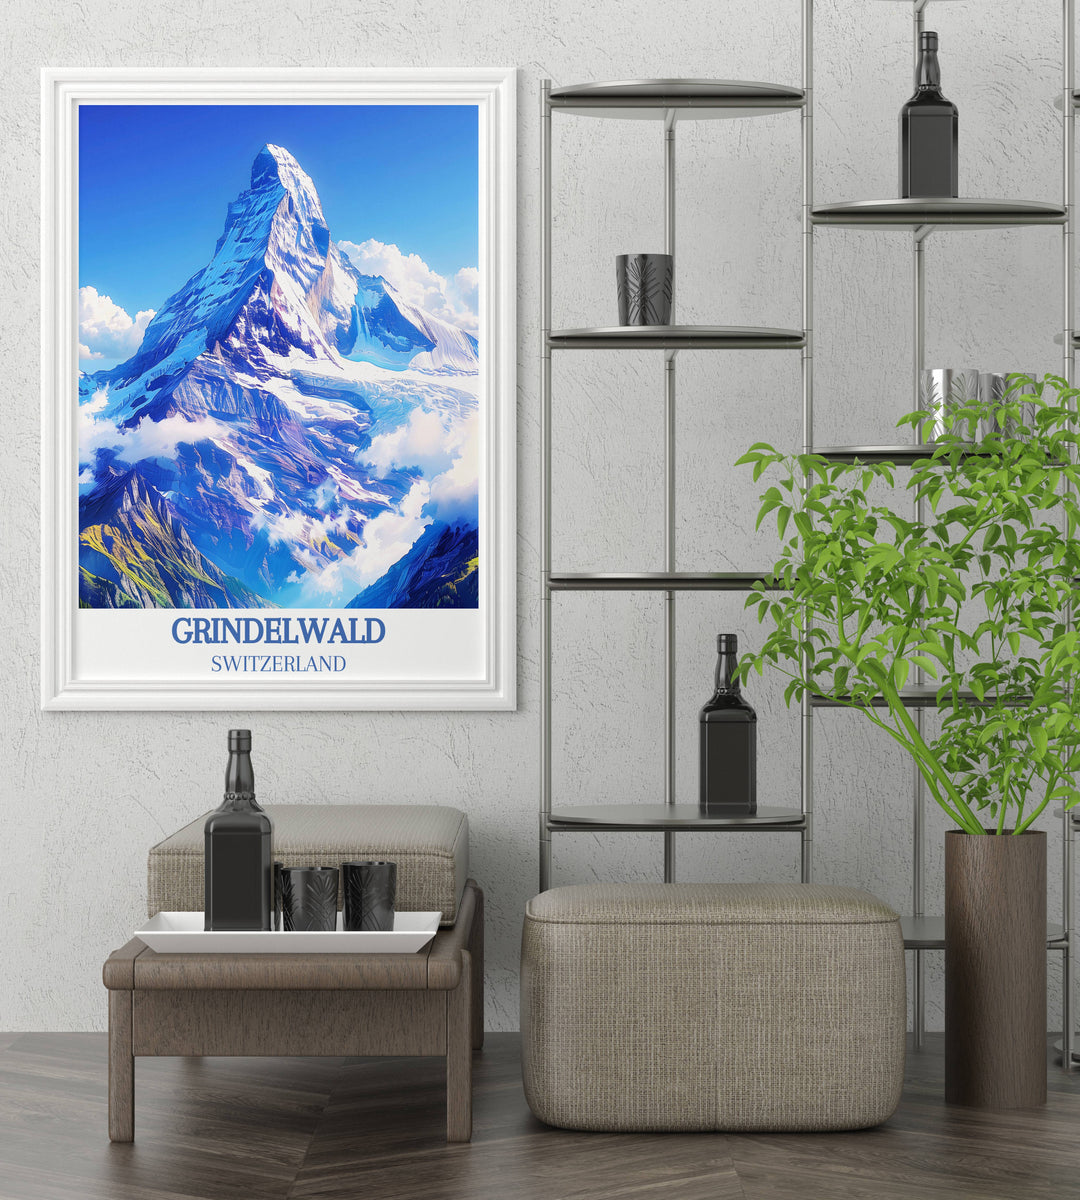 Close up of the North Face of Eiger Mountain, highlighting its rugged texture and sheer cliffs in an Eiger travel poster.